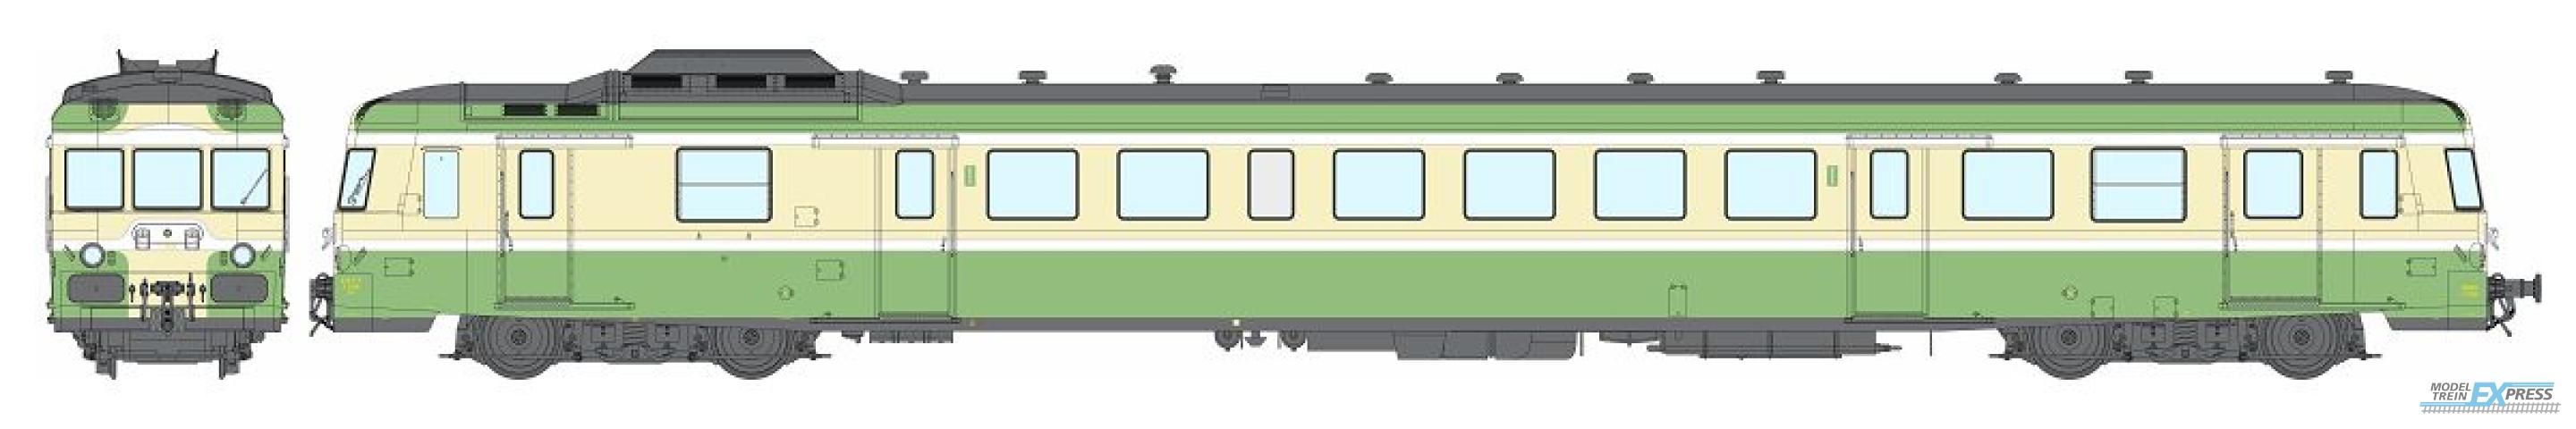 REE models MB-228S X 2899 with skirt, 1st class Origin, Green 314 and Yellow straw 410, RENNES, SNCF Era III - DCC Sound Functional Pantos